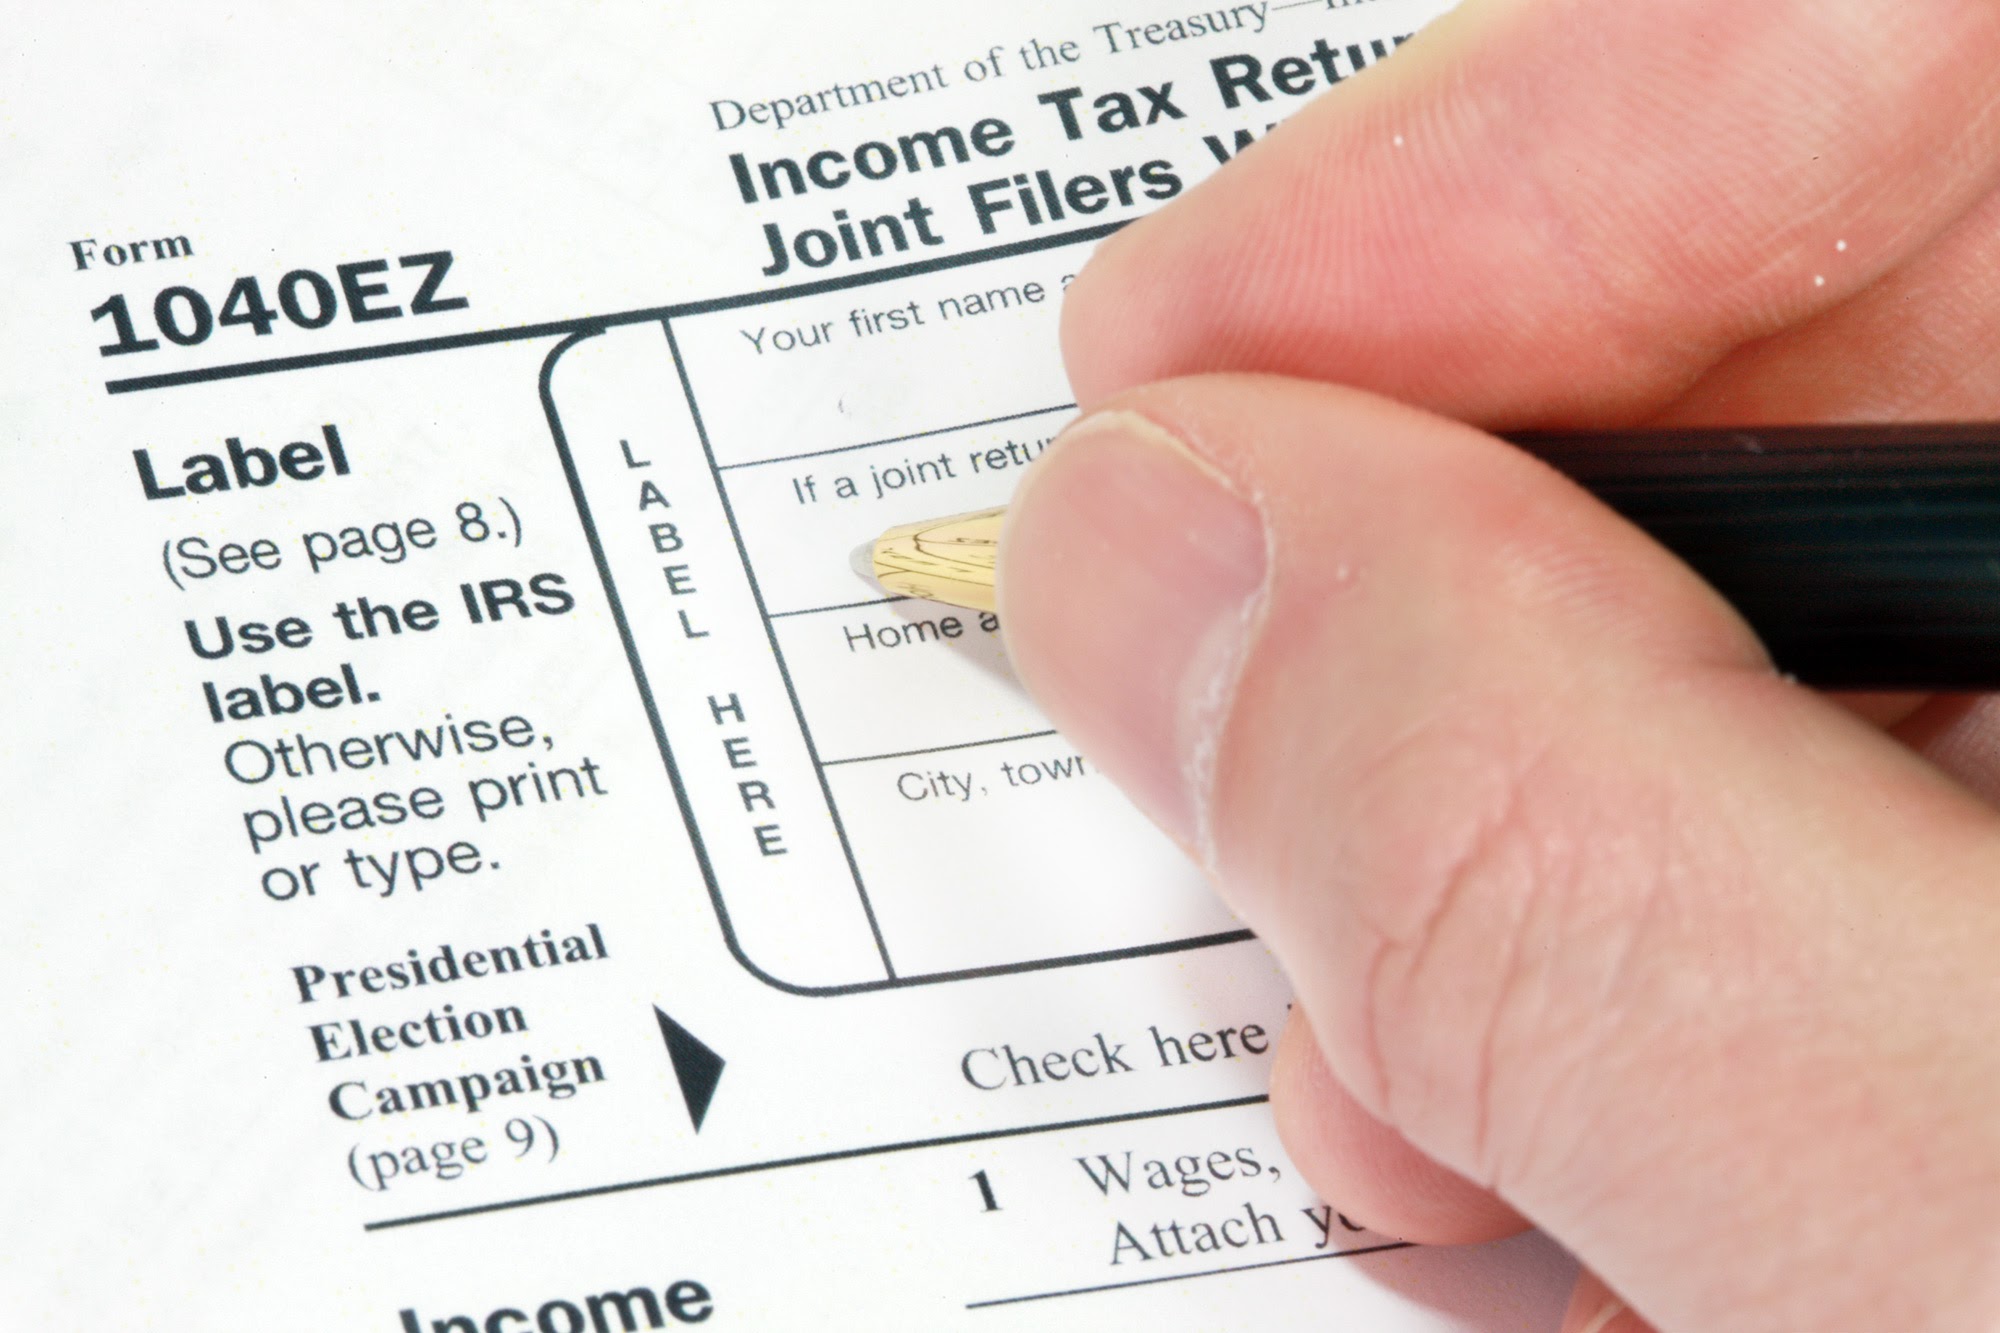 who-can-receive-an-inheritance-tax-refund-in-pennsylvania